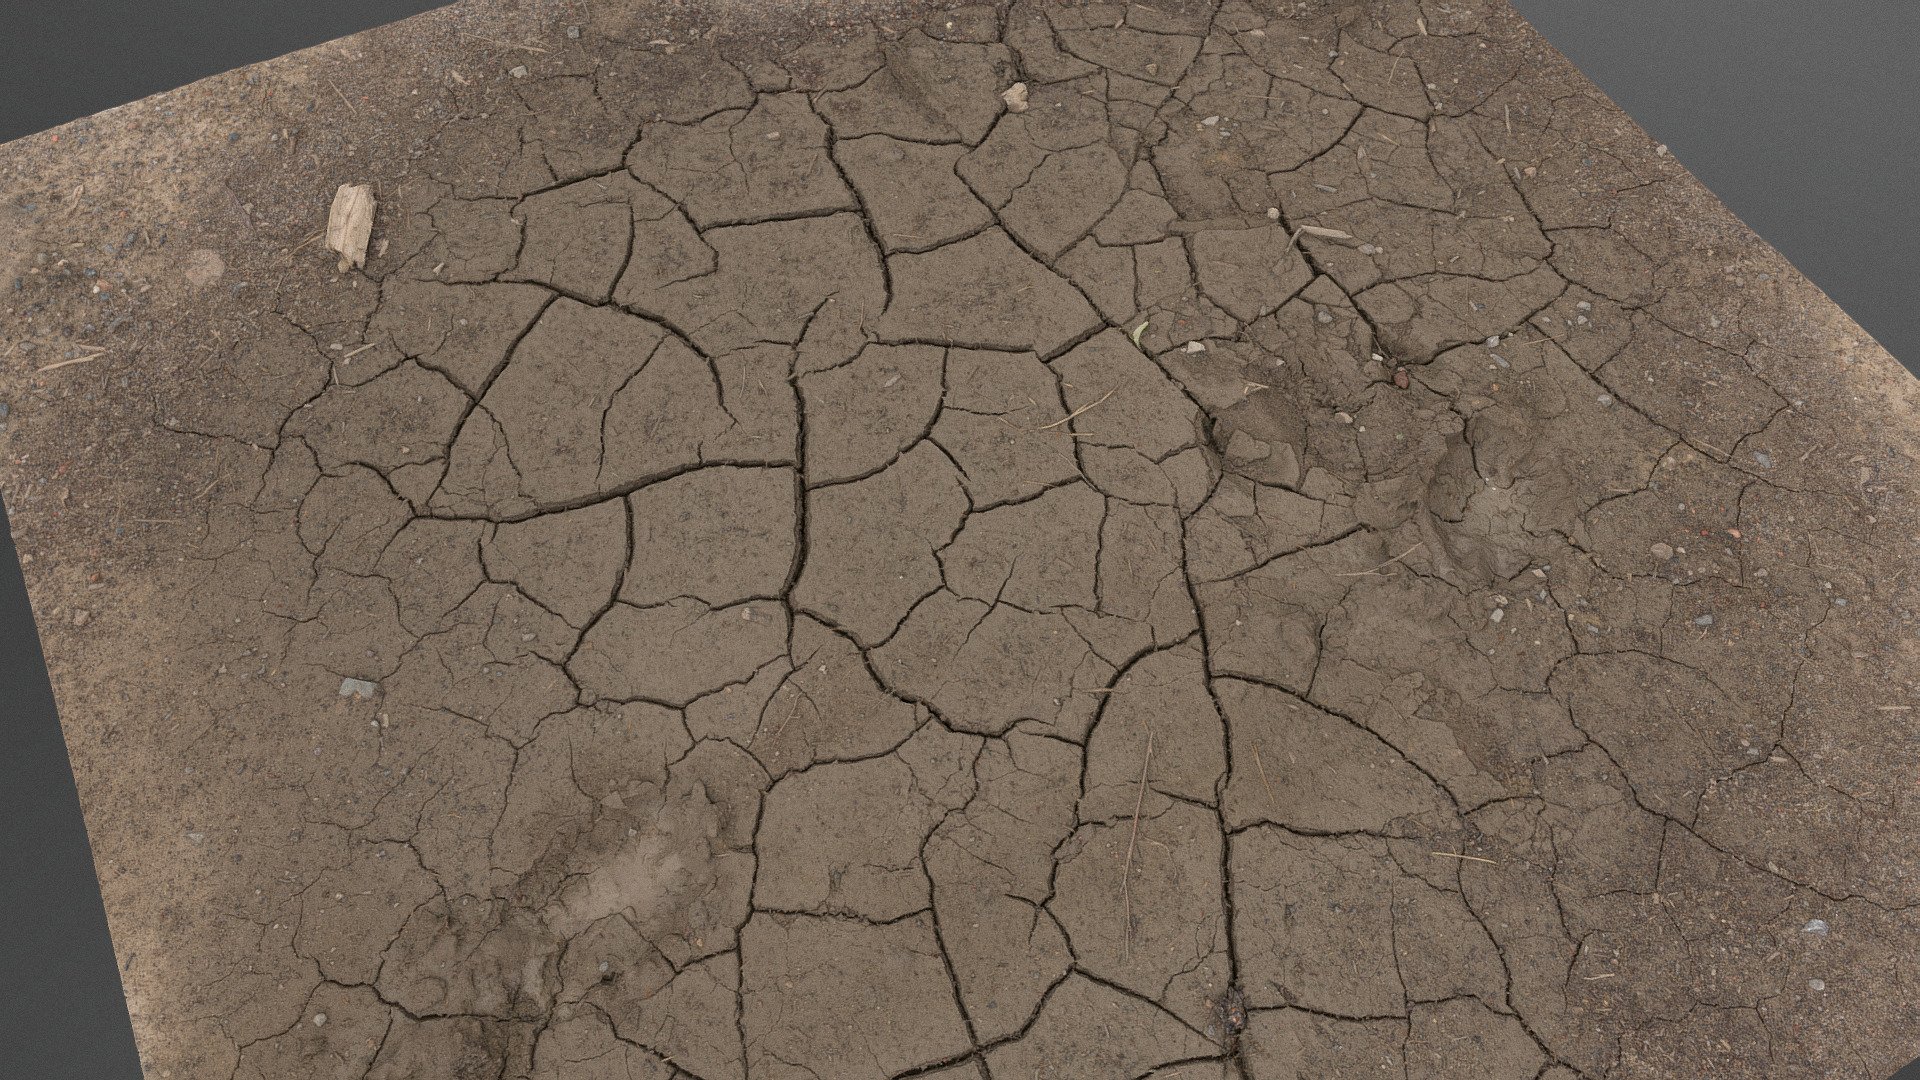 Cracked mud dirt soil ground earth   land barren eroded ground dust bowl with puddle cracks

photogrammetry scan (70x36mp), 2x8k textures - Cracked mud dirt - Buy Royalty Free 3D model by matousekfoto 3d model